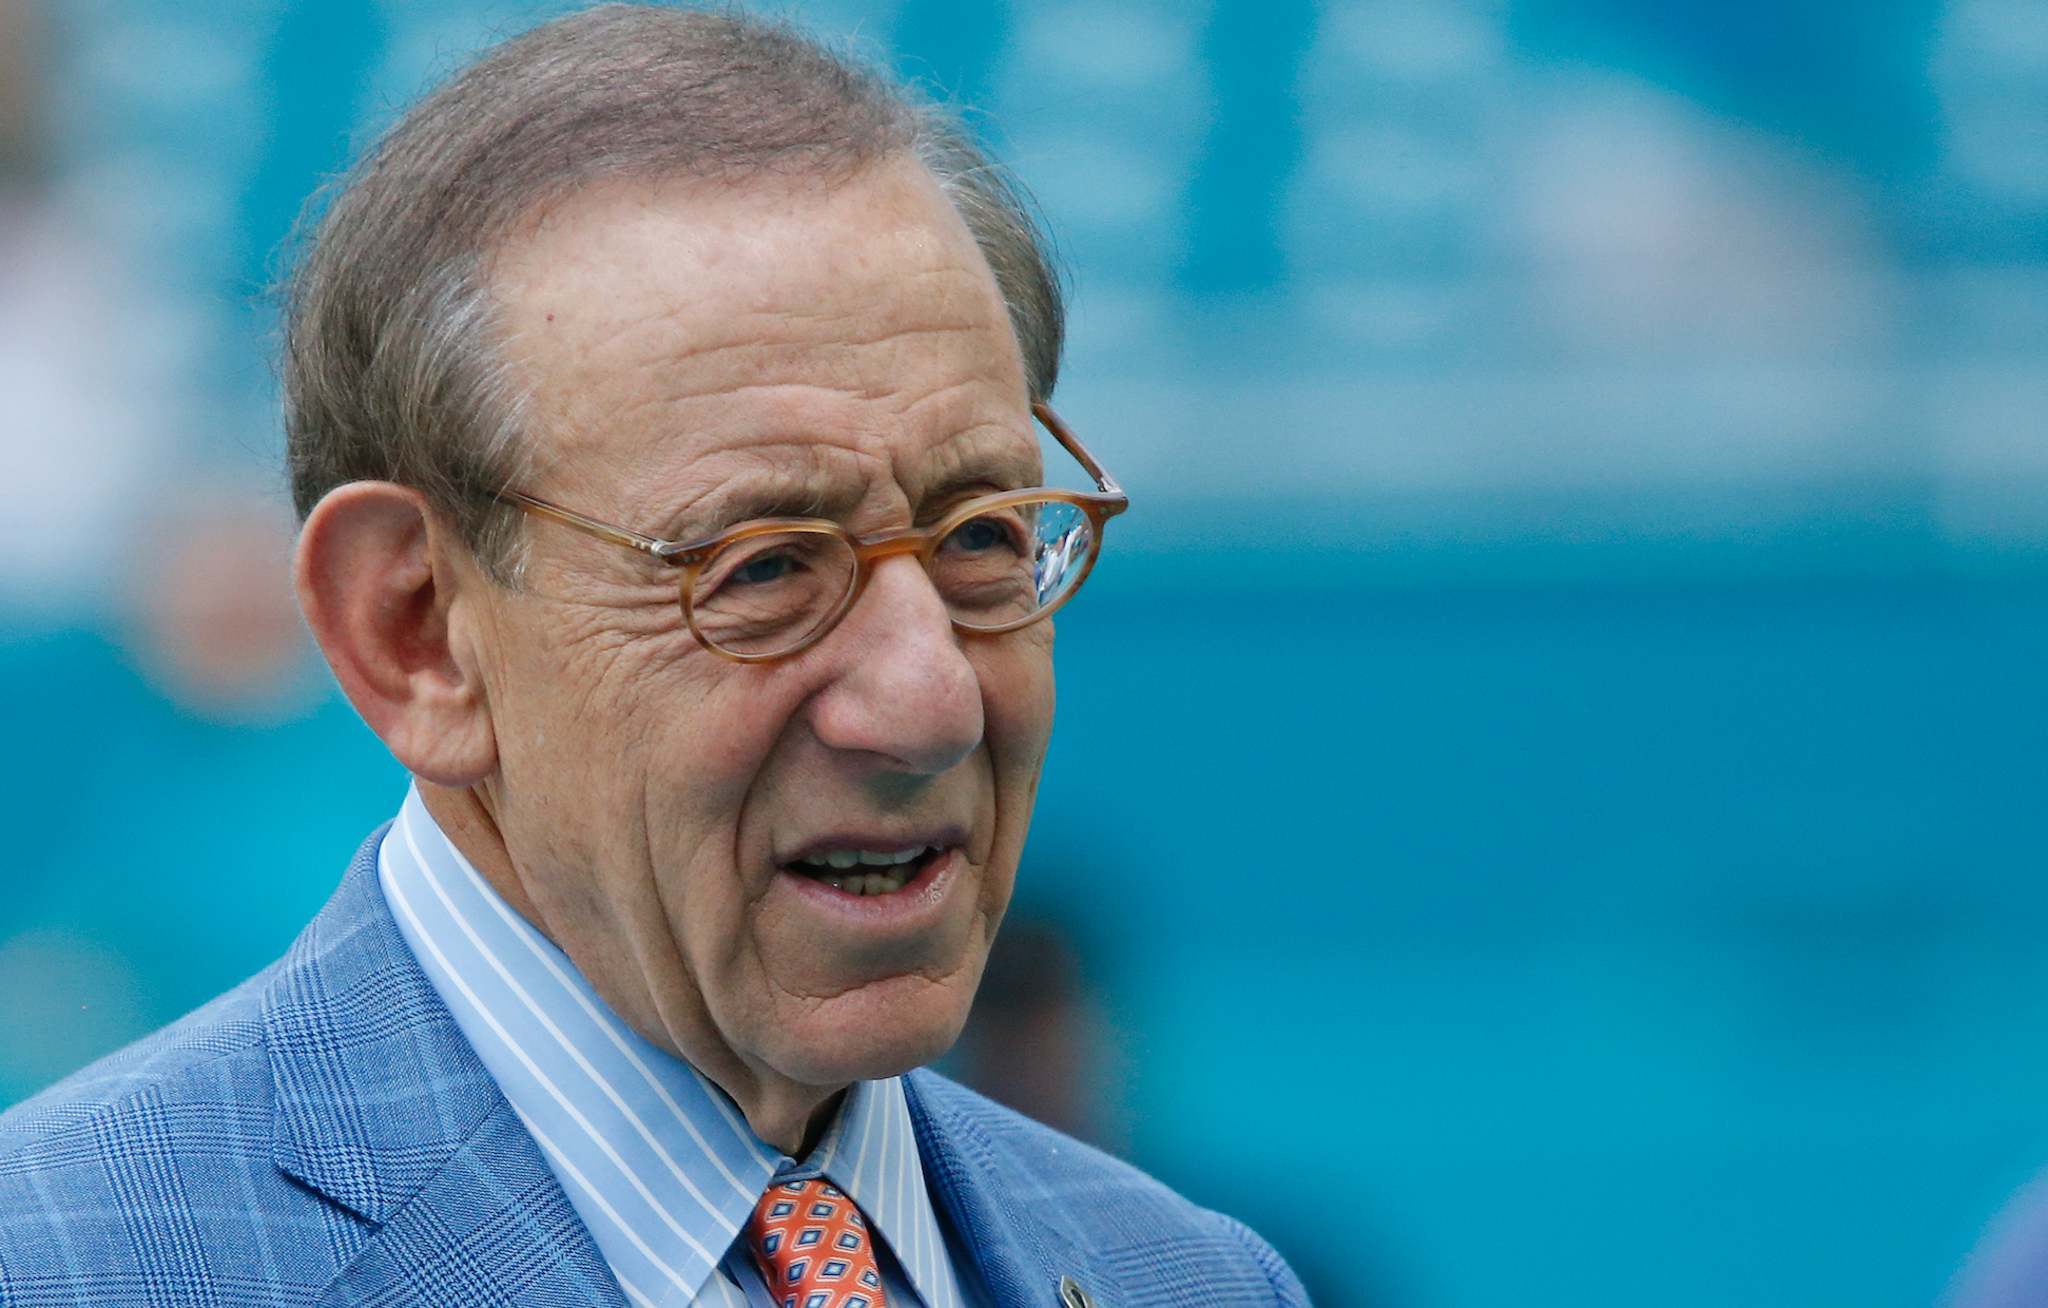 Chairman of the Board/Managing General Partner Stephen M. Ross of the Miami Dolphins watches the team warm up prior to the NFL game against the New York Jets on November 4, 2018 at Hard Rock Stadium in Miami Gardens, Florida. The Dolphins defeated the Jet